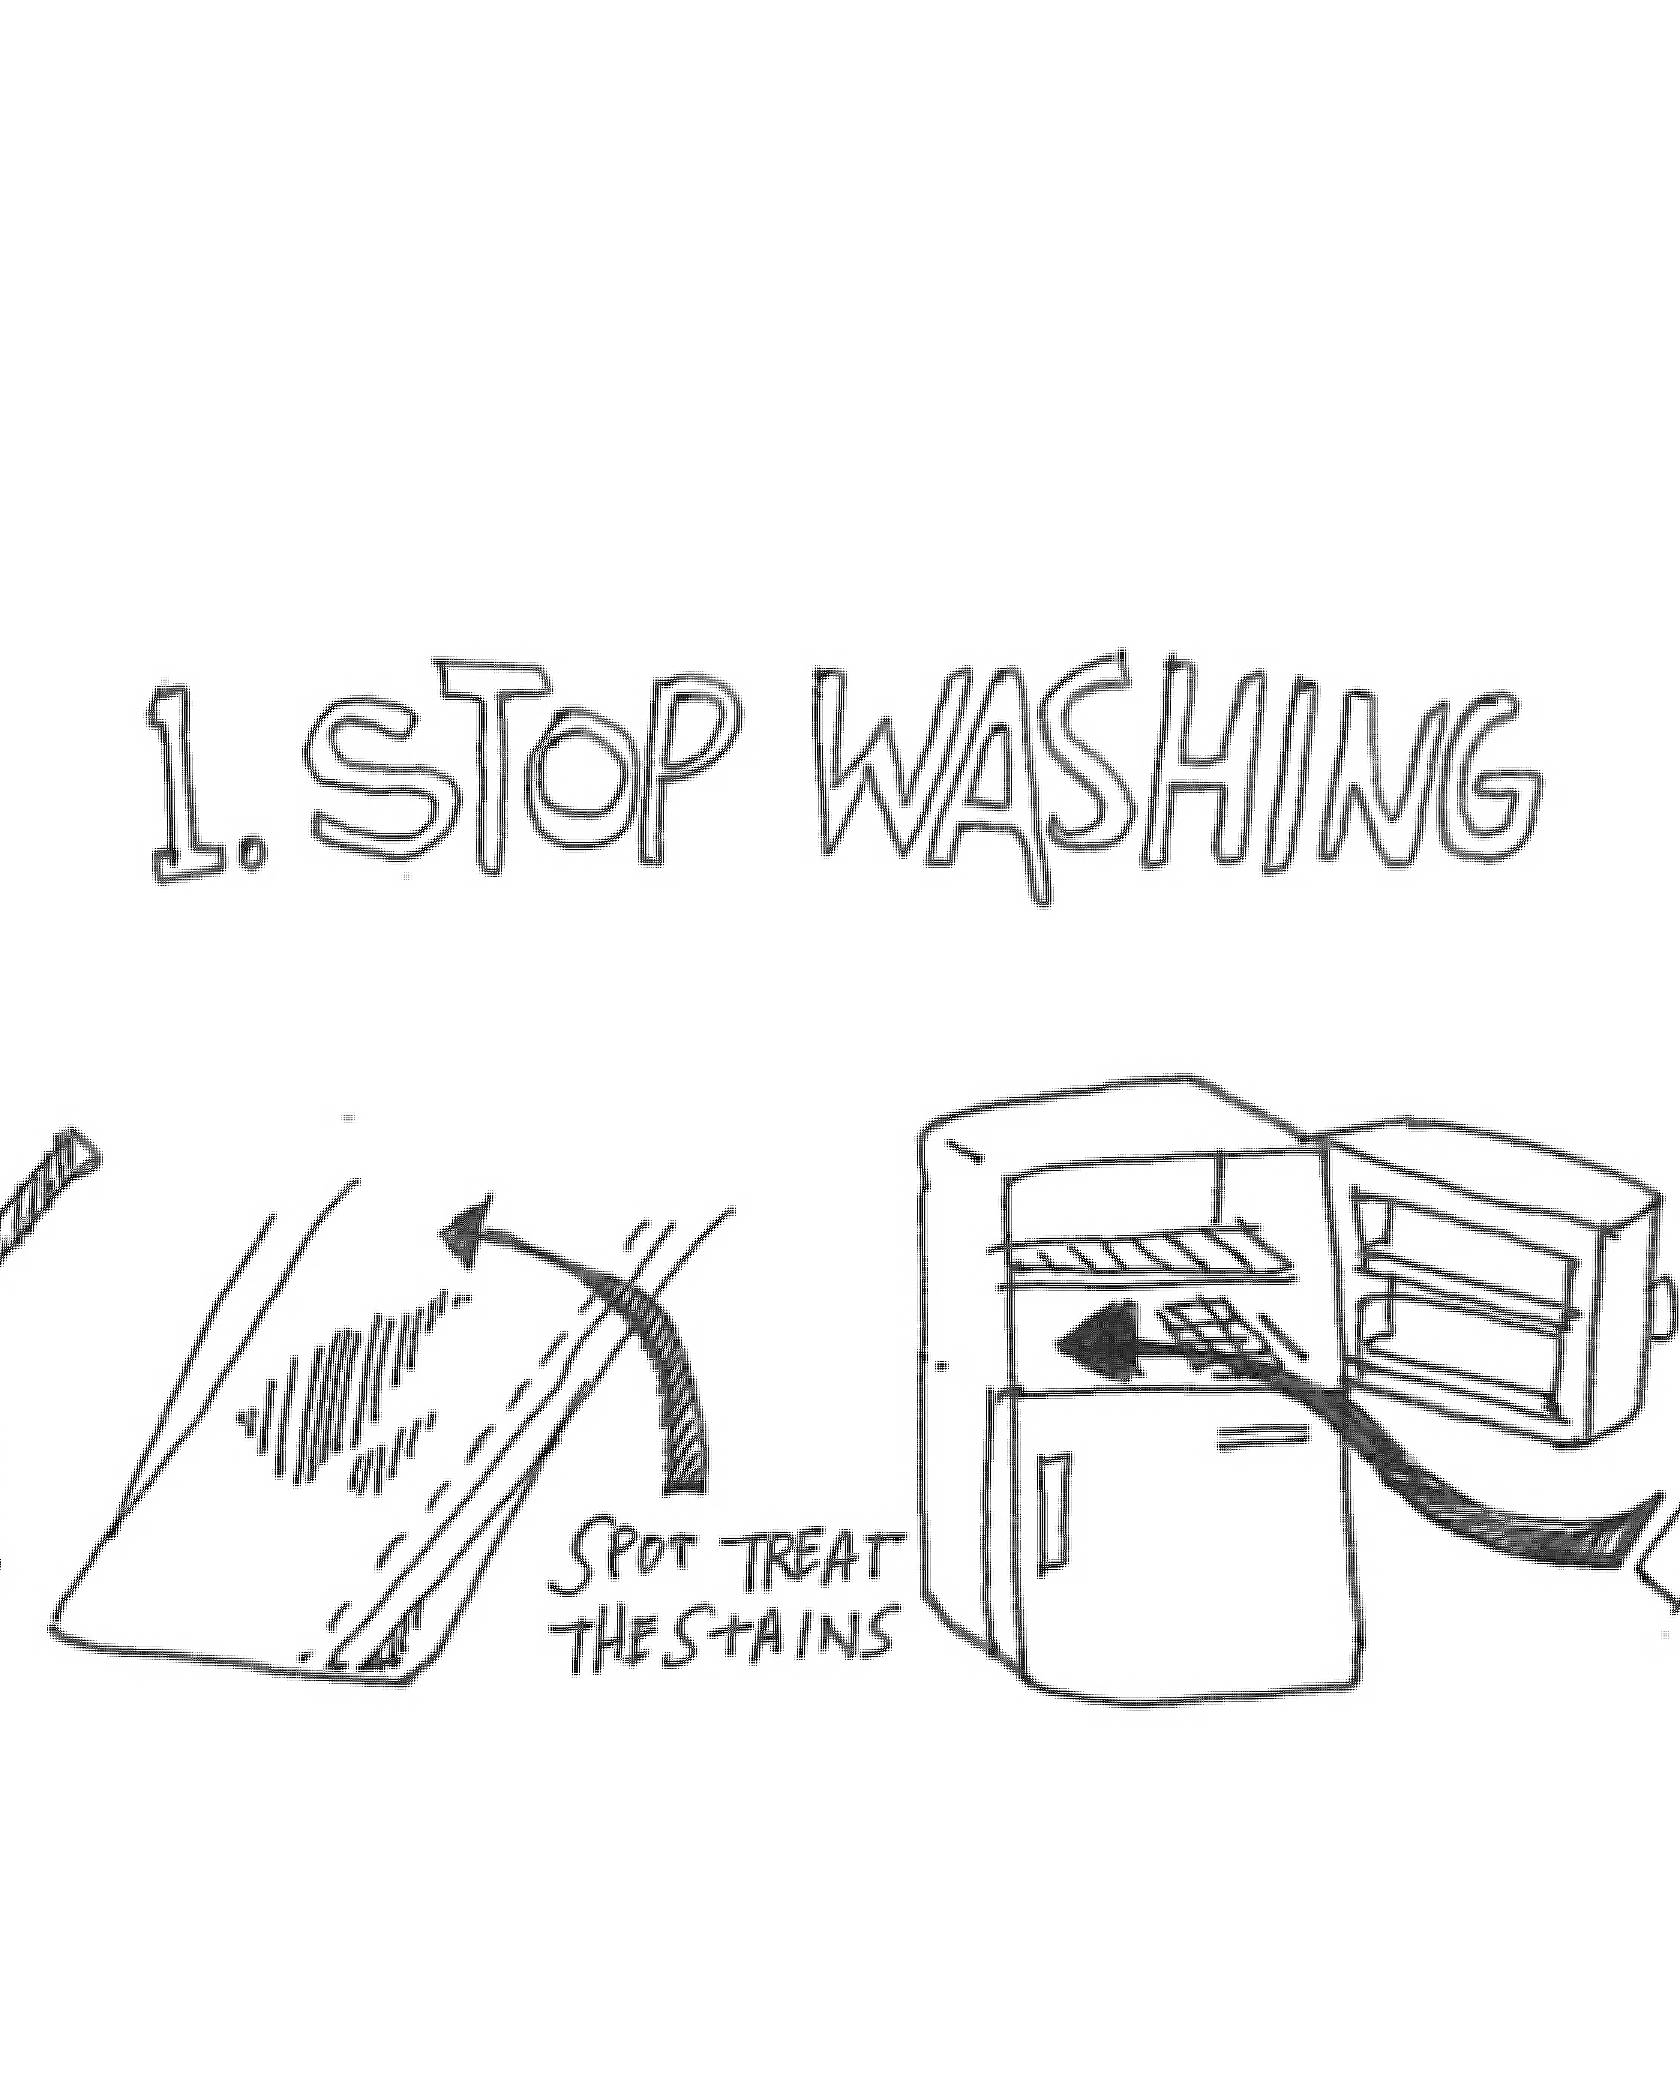 Illustration of a washer and a fridge with a headline reading 1. STOP WASHING